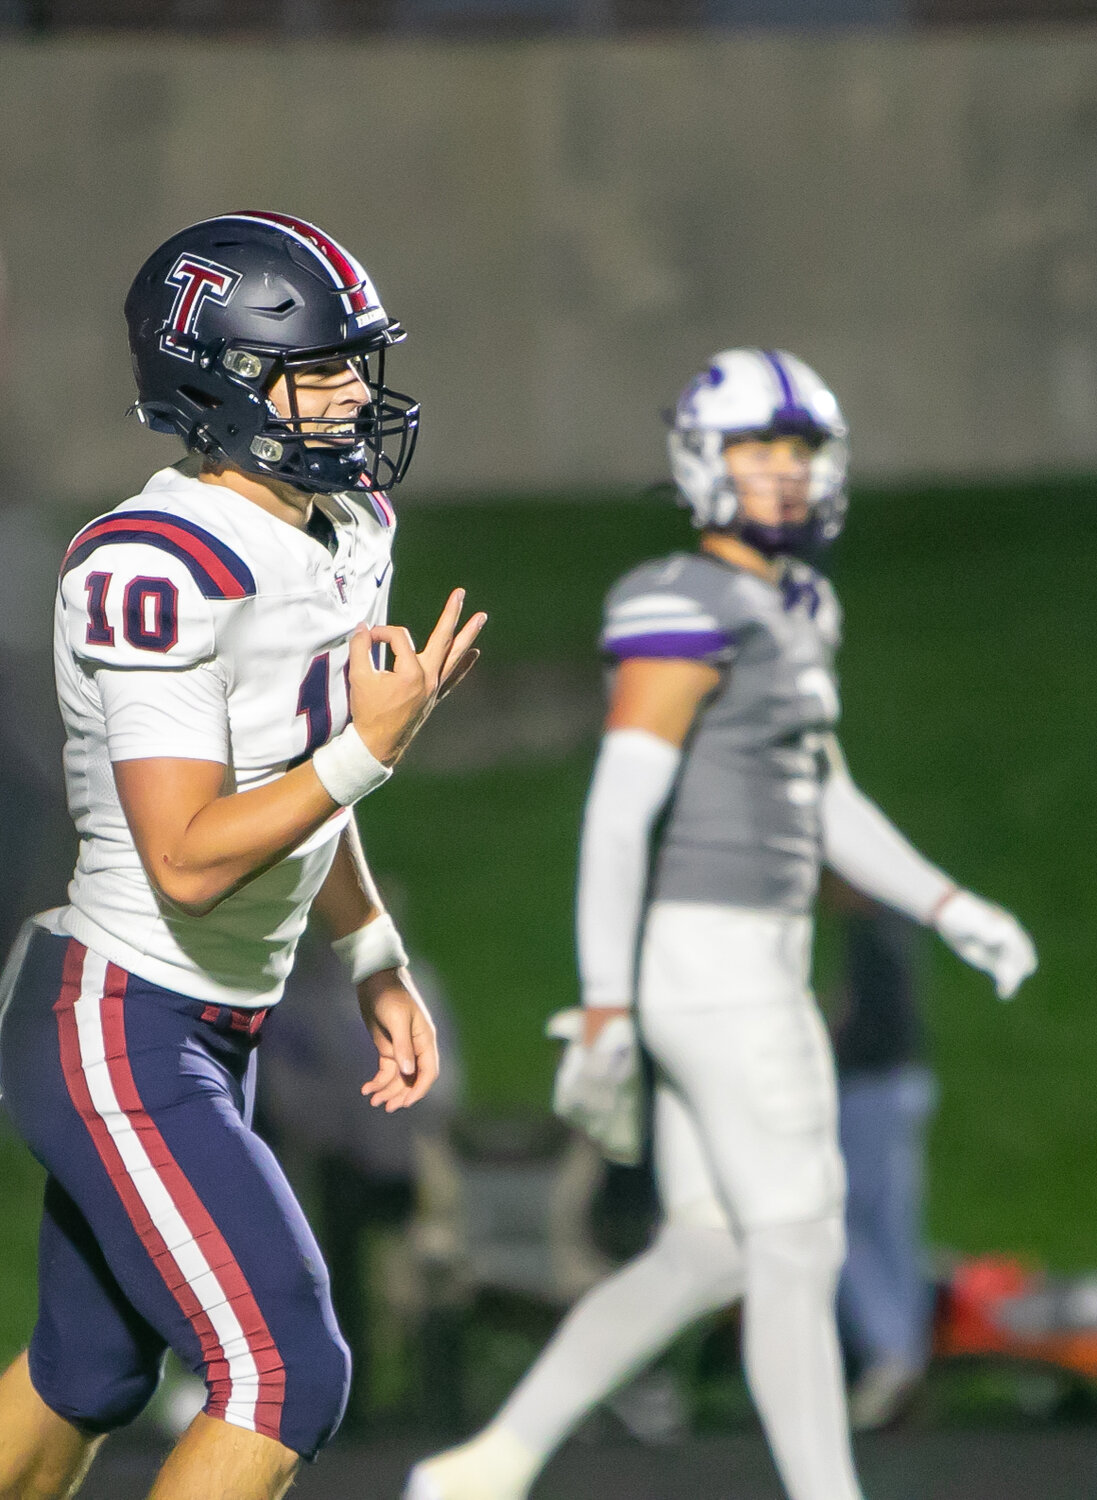 Wyatt Young celebrates after scoring a touchdown during Friday's game between Tompkins and Ridge Point at Hall Stadium.